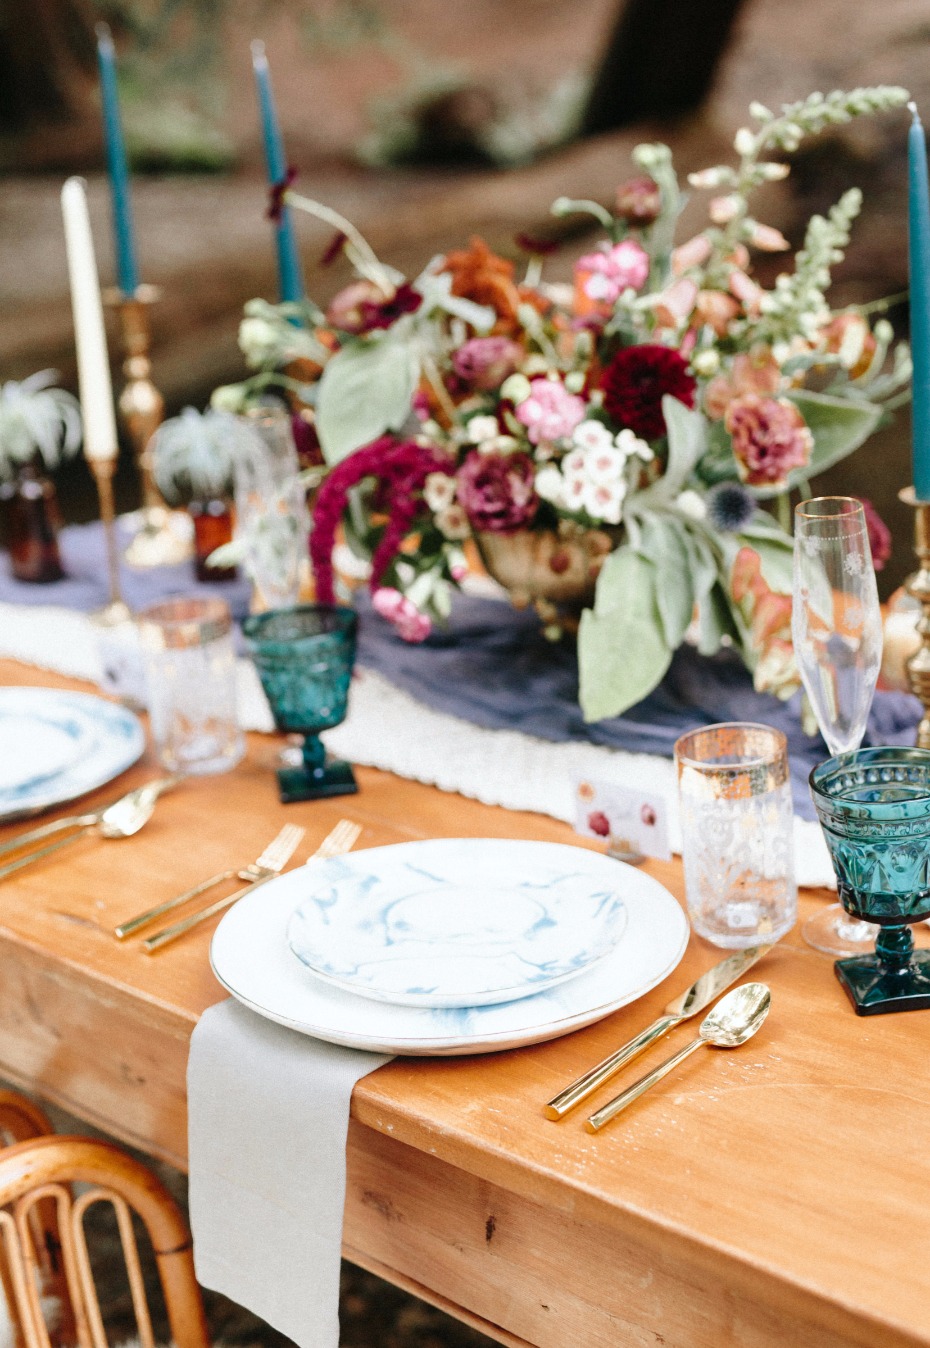 mismatched wedding table decor give the table a shabby chic quality